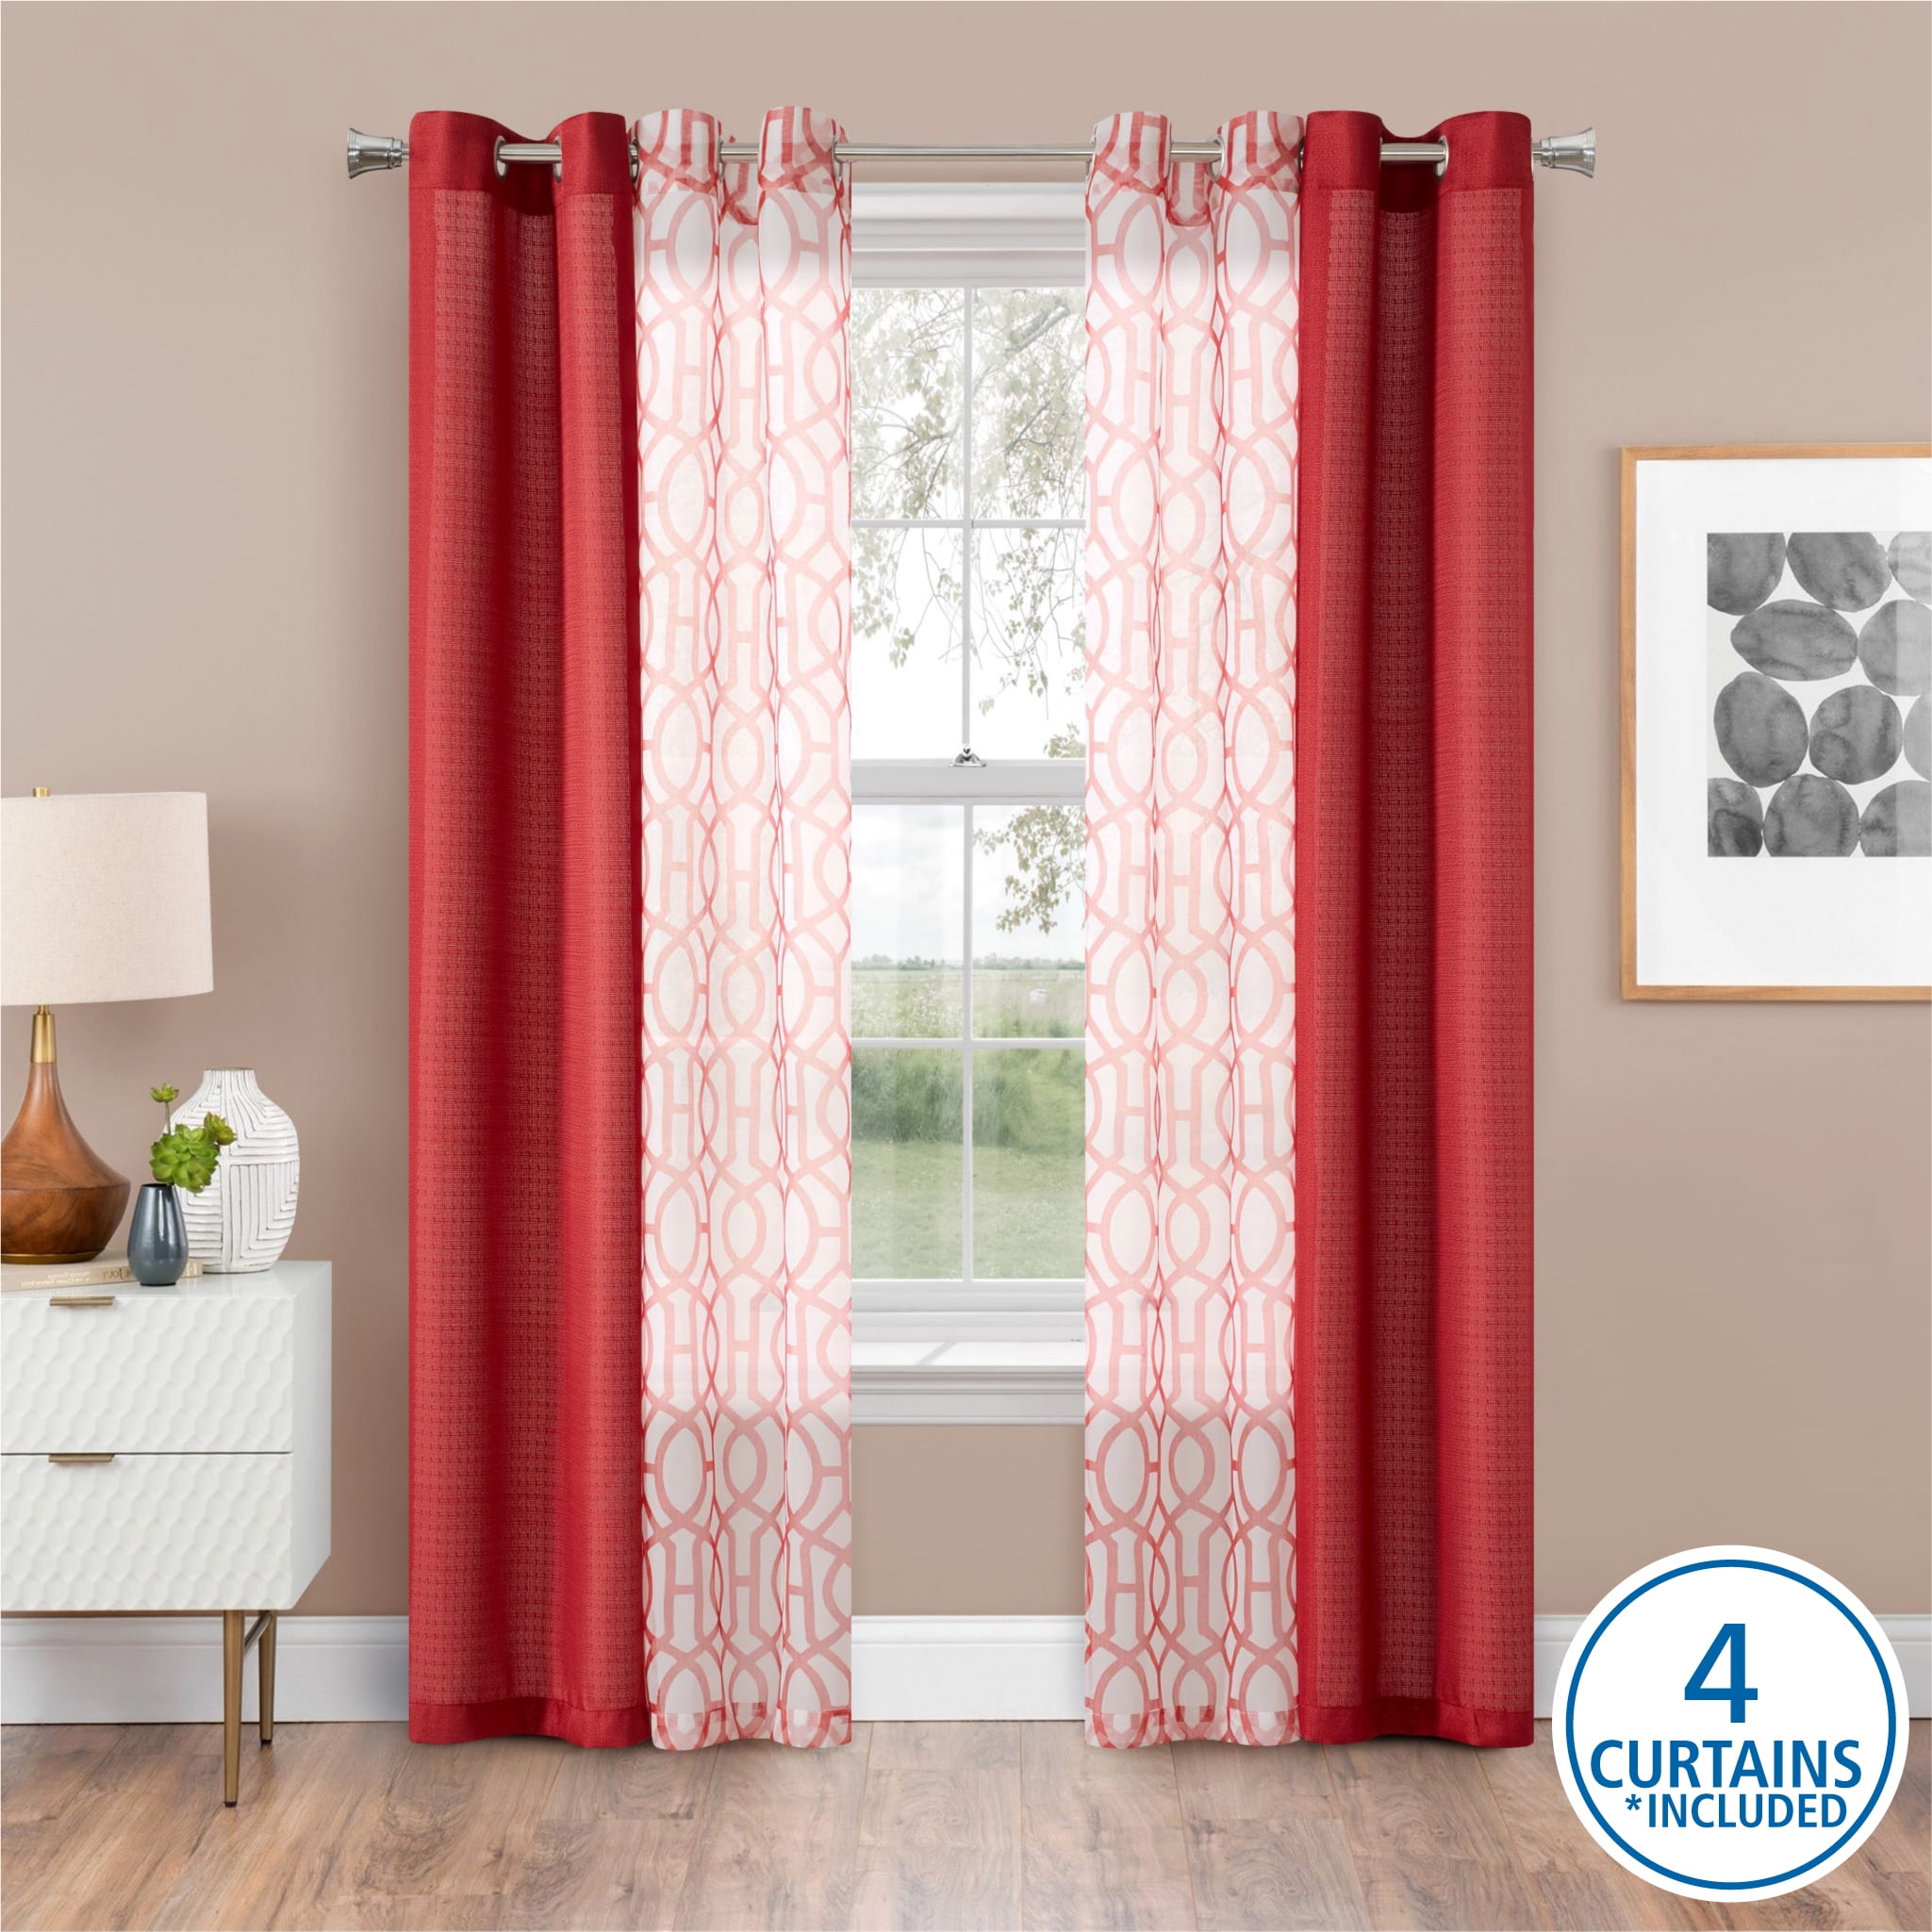 Mainstays 4 Piece Red Polyester Light Filtering Grommet Panel Curtain Set, 27.5" x 84" inches